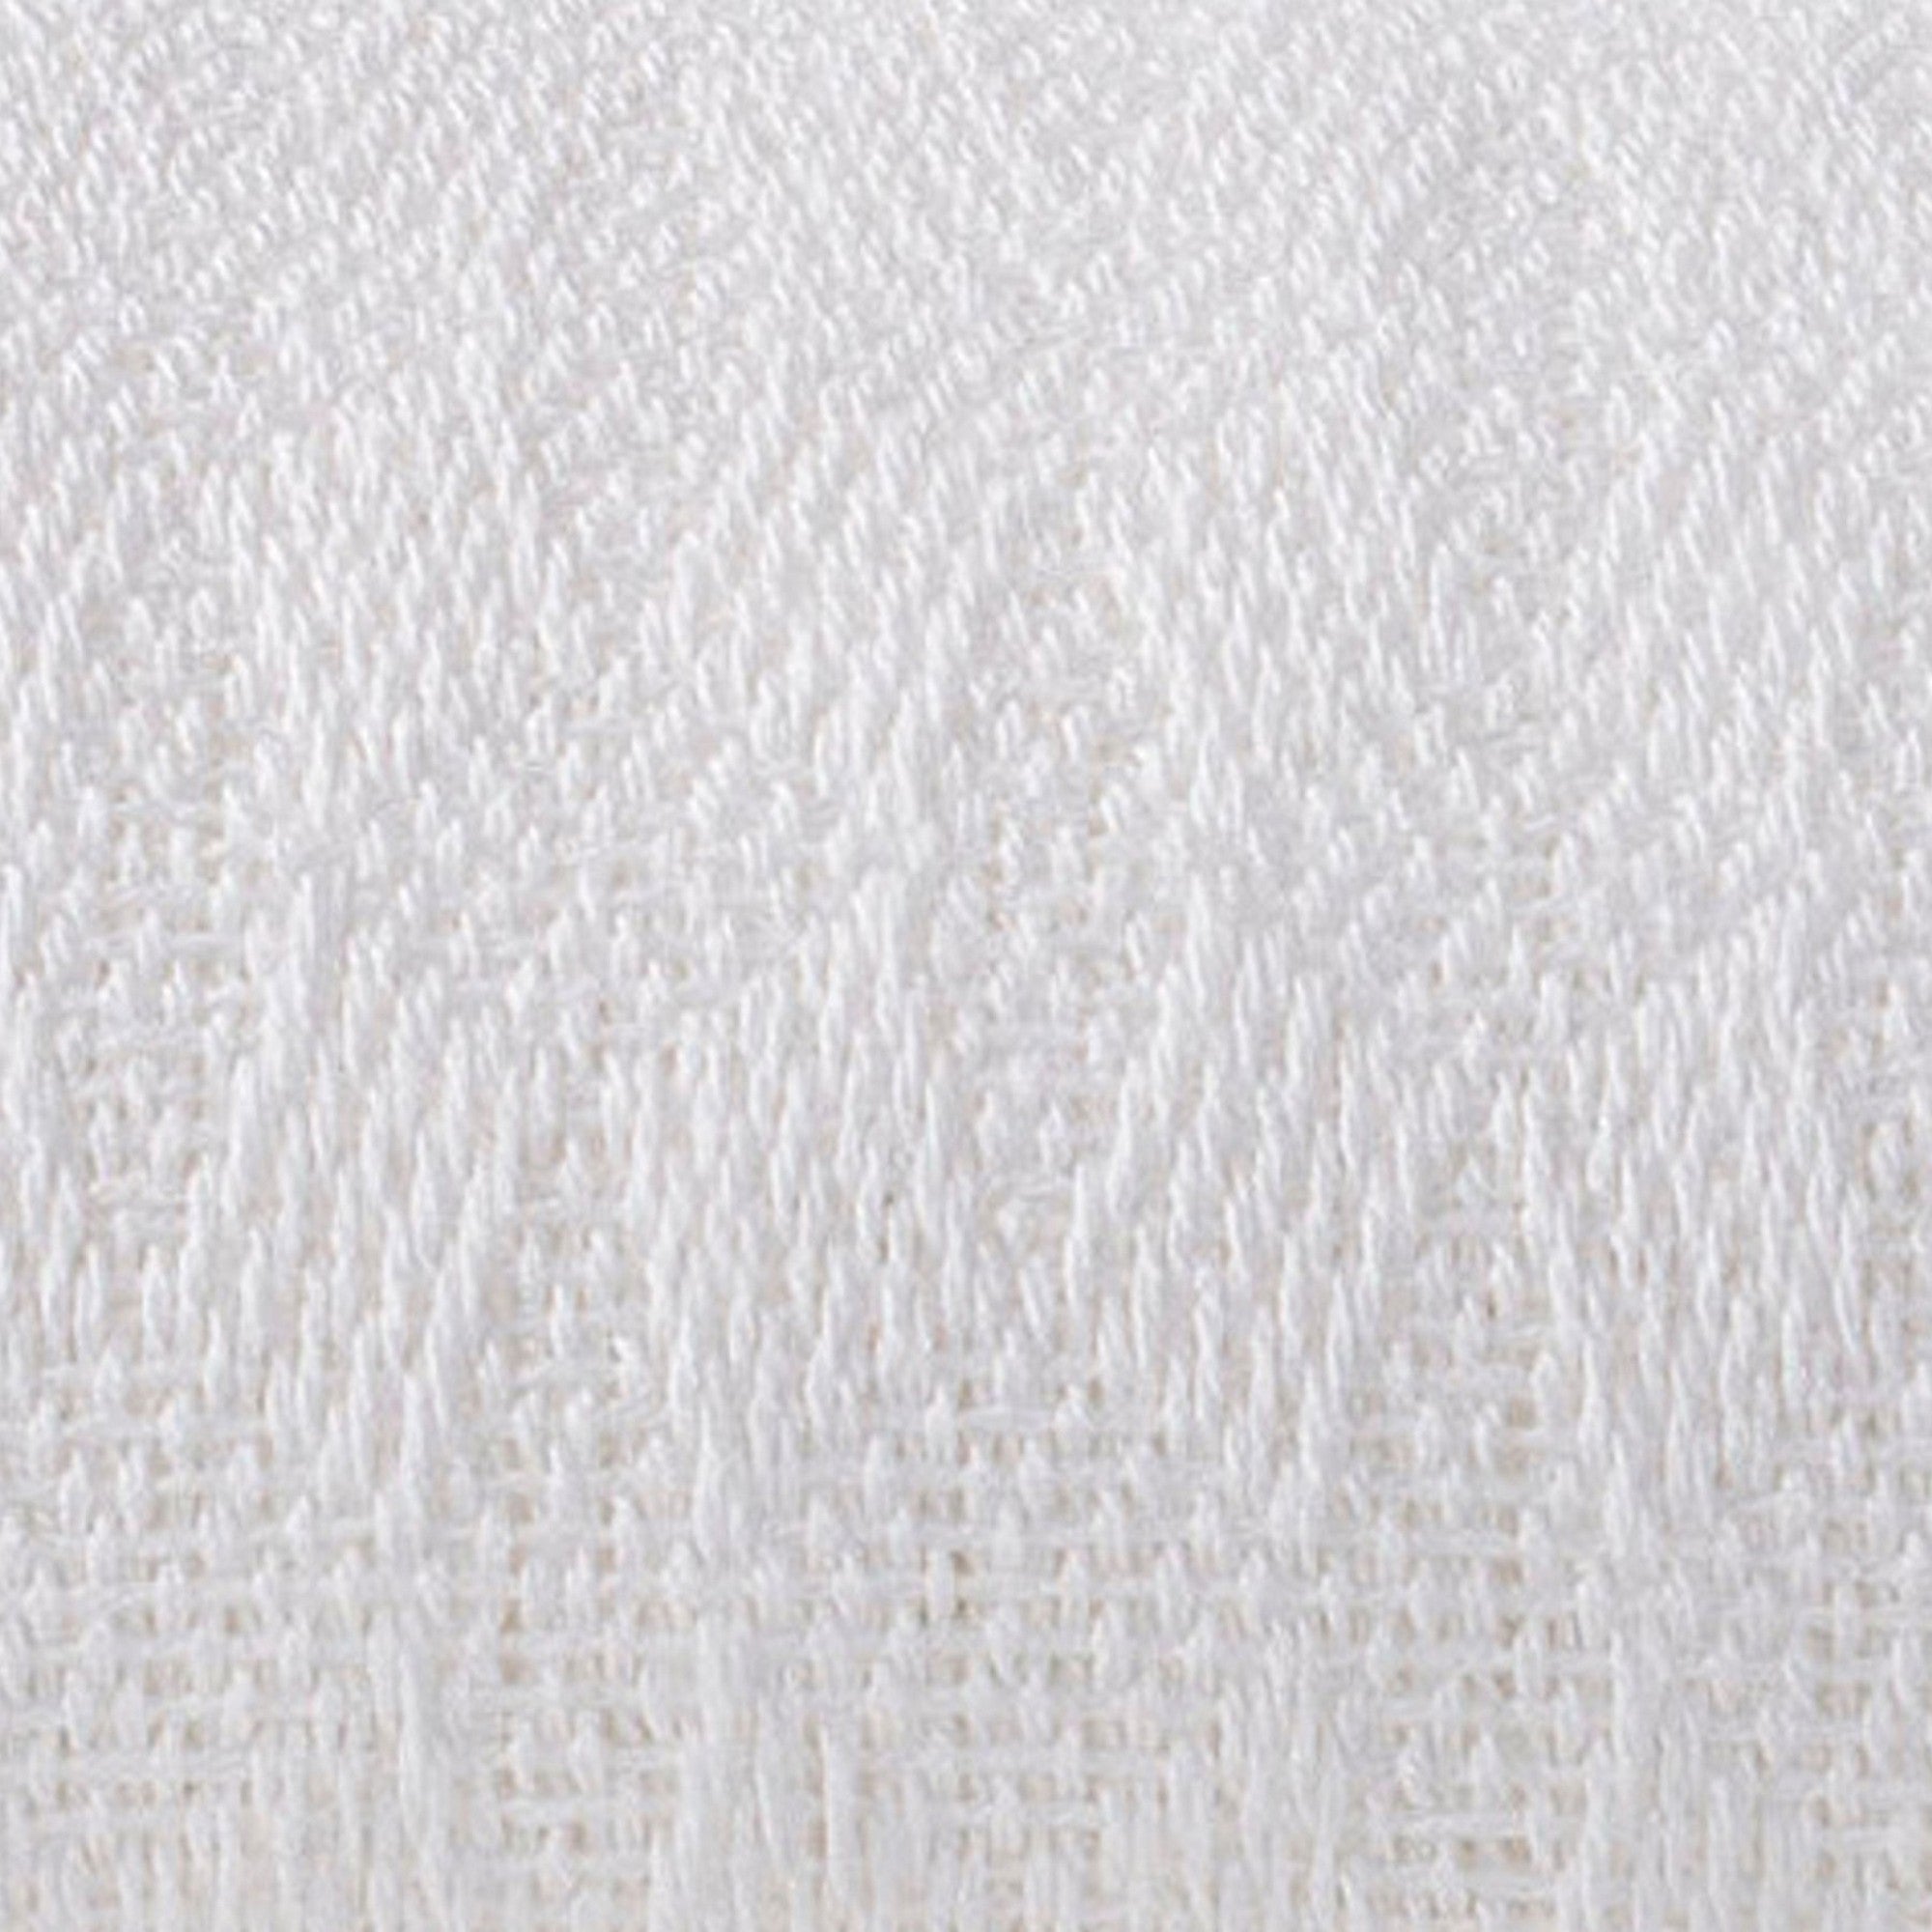 100% BAMBOO Bed Blanket - Hypoallergenic, Silky-Soft, and Highest Quality Coverlets - Queen, White